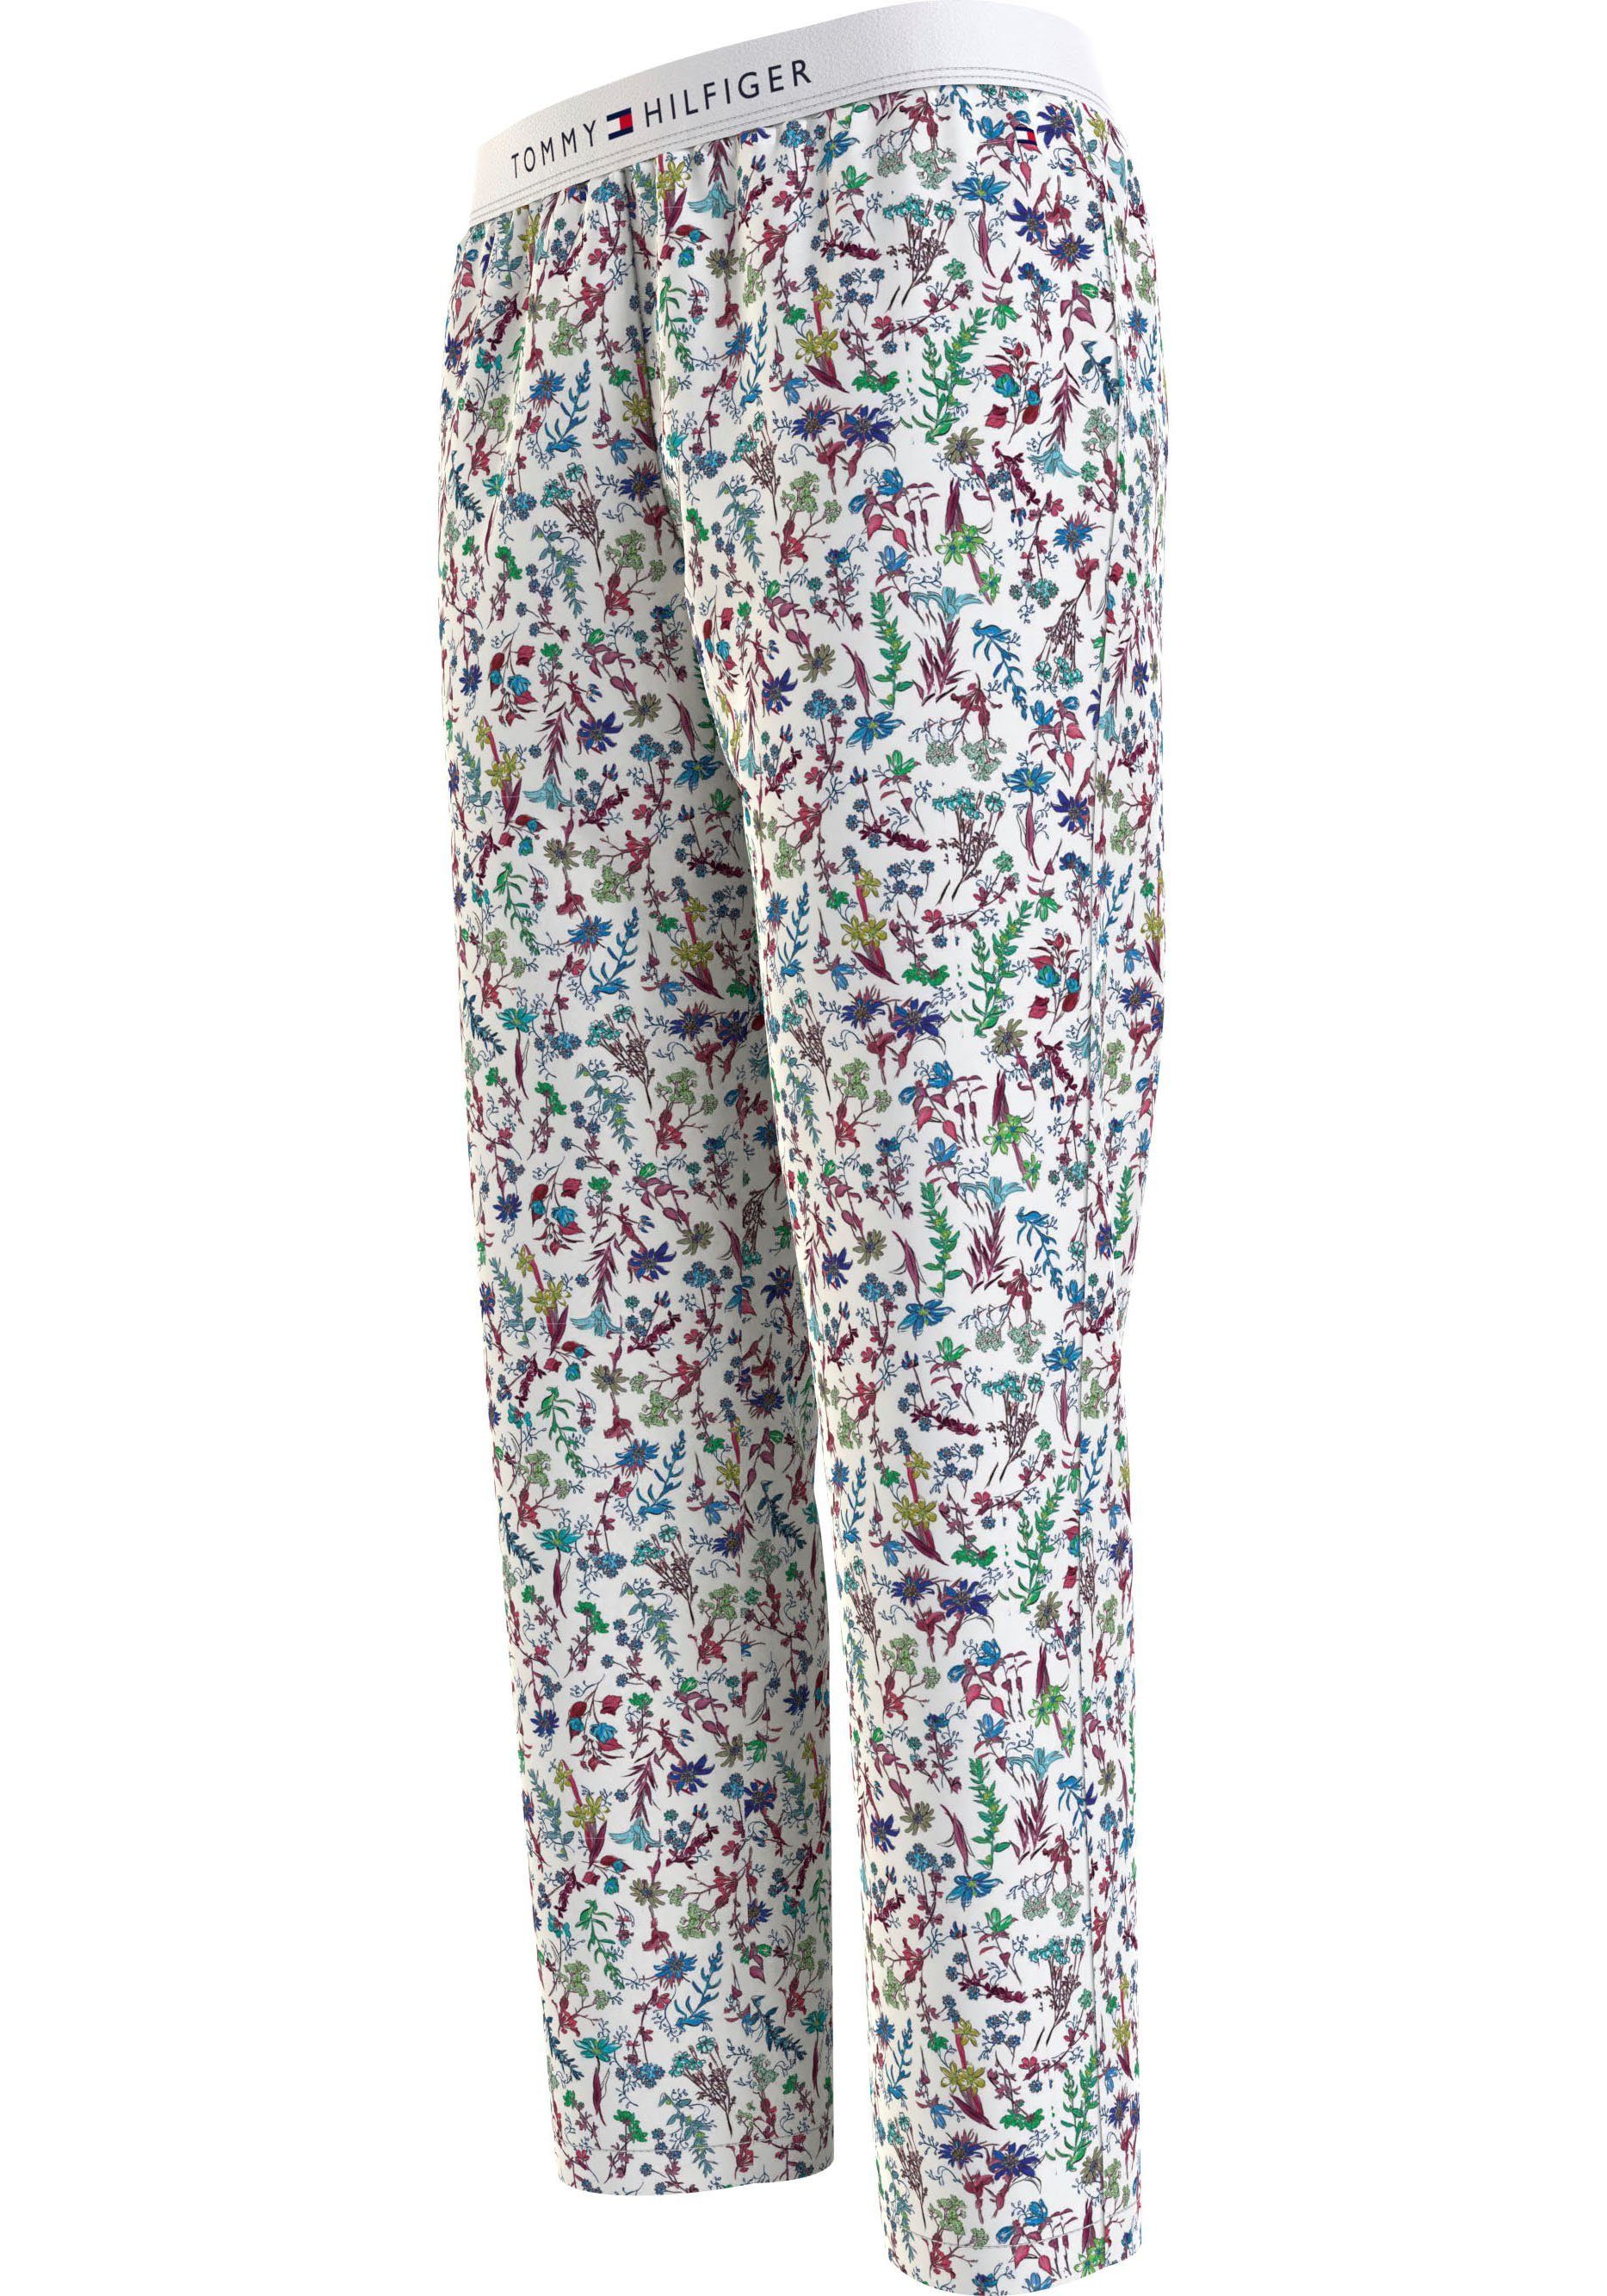 farbefrohem WOVEN PANTS Muster TH Schlafhose Hilfiger in Underwear floralem Tommy